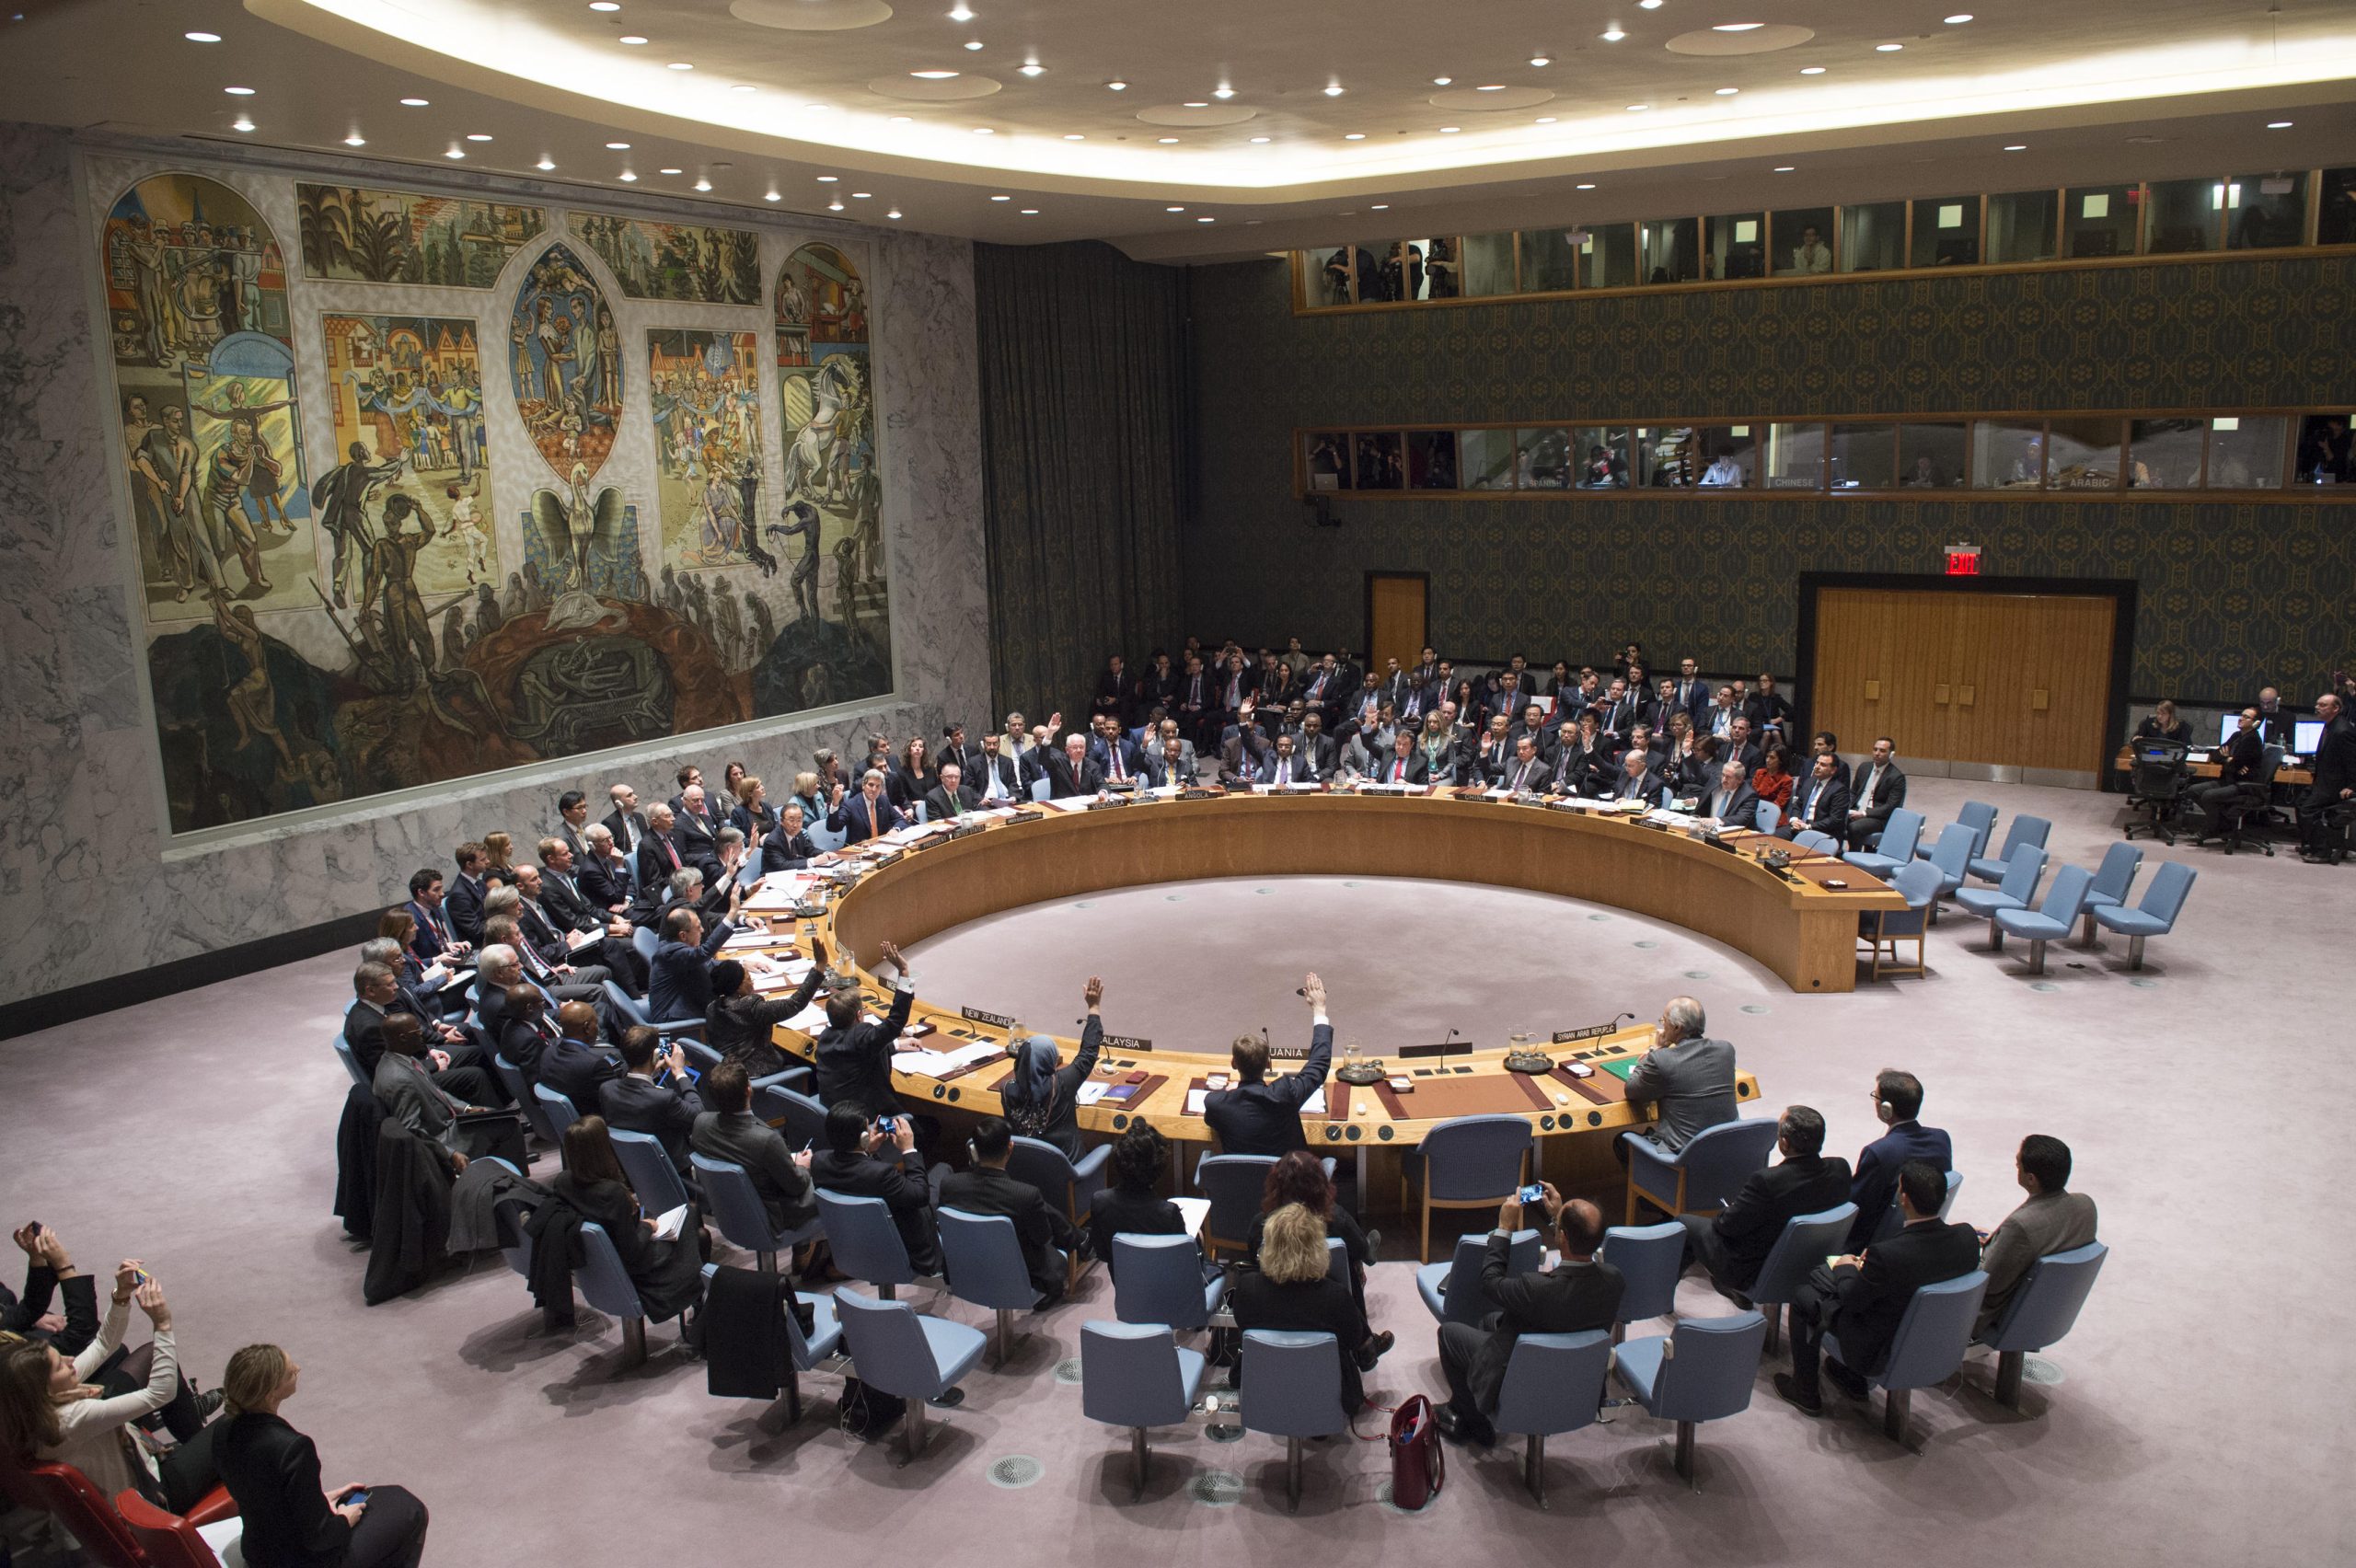 Did Canada’s position on Palestine sink its UN Security Council bid?